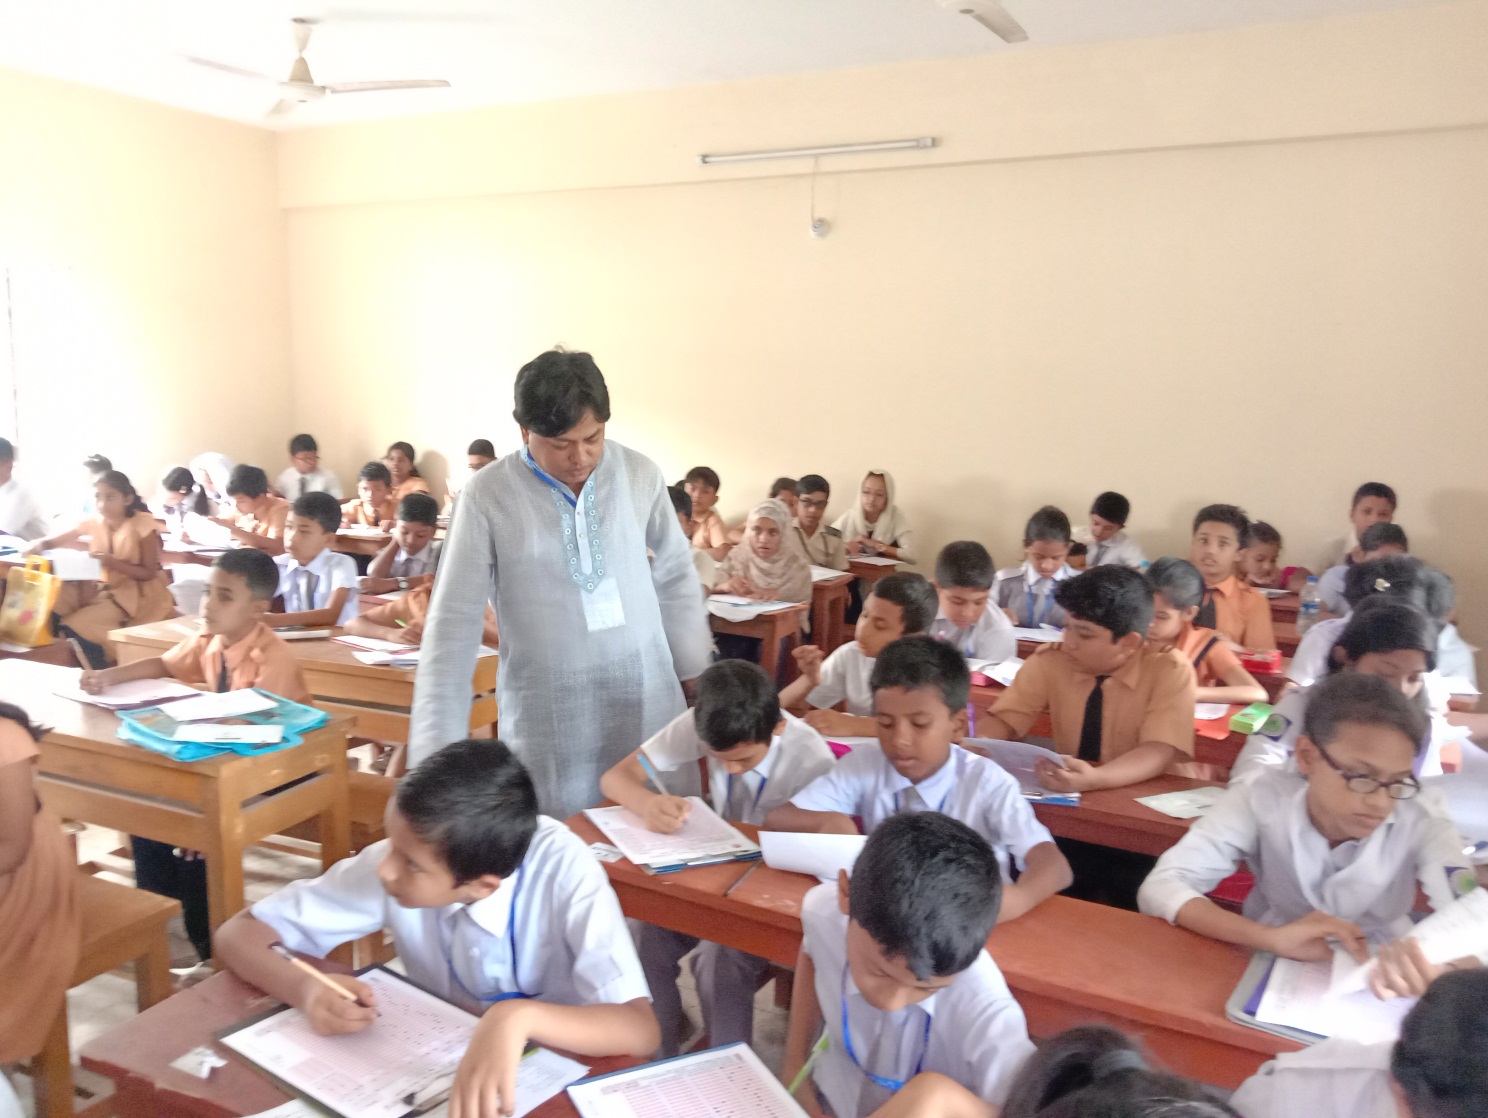 In the picture- Chairman of by the Technical Education Board and Begumganj Technical and Computer Institute Principal Gias Uddin Mithu is seen as an observer at Maijdee Public School and College on TSP scholarship examination.